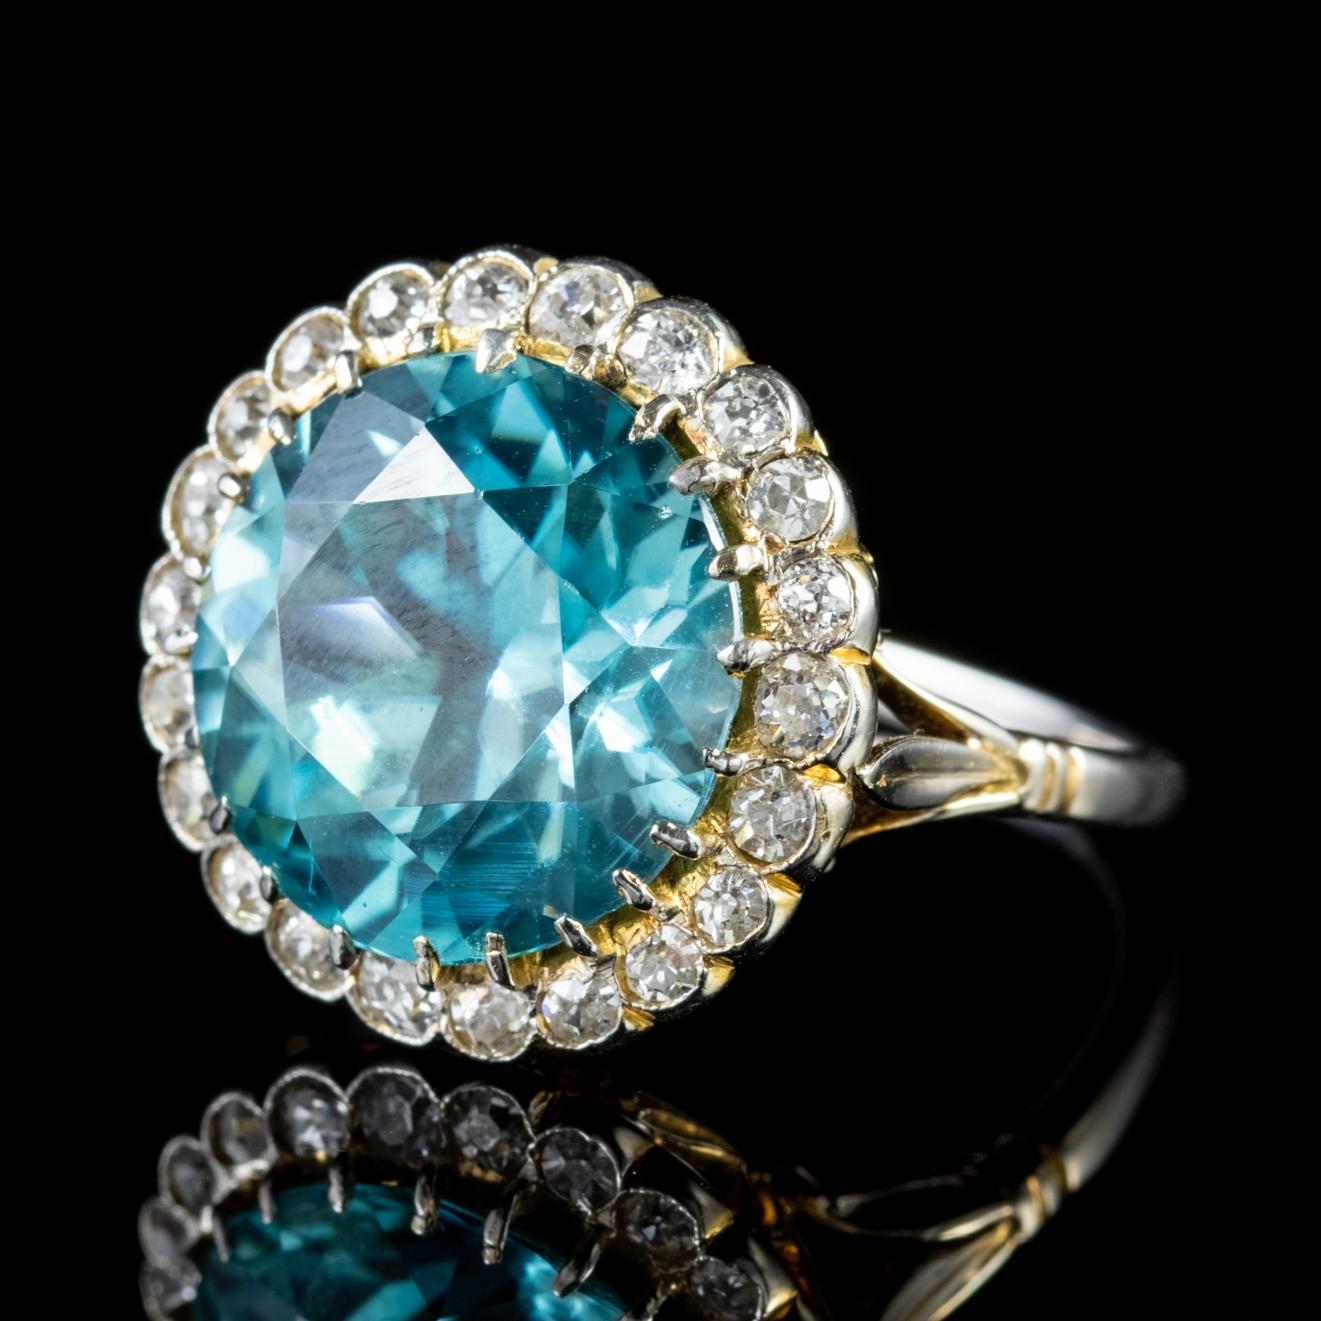 A spectacular antique Edwardian cluster ring adorned with a magnificent 8ct Blue Zircon which is a lovely shade of teal/ blue and haloed by sparkling Diamonds which total to approx. 1.10ct.

The stones are claw set in a lovely 18ct Yellow Gold